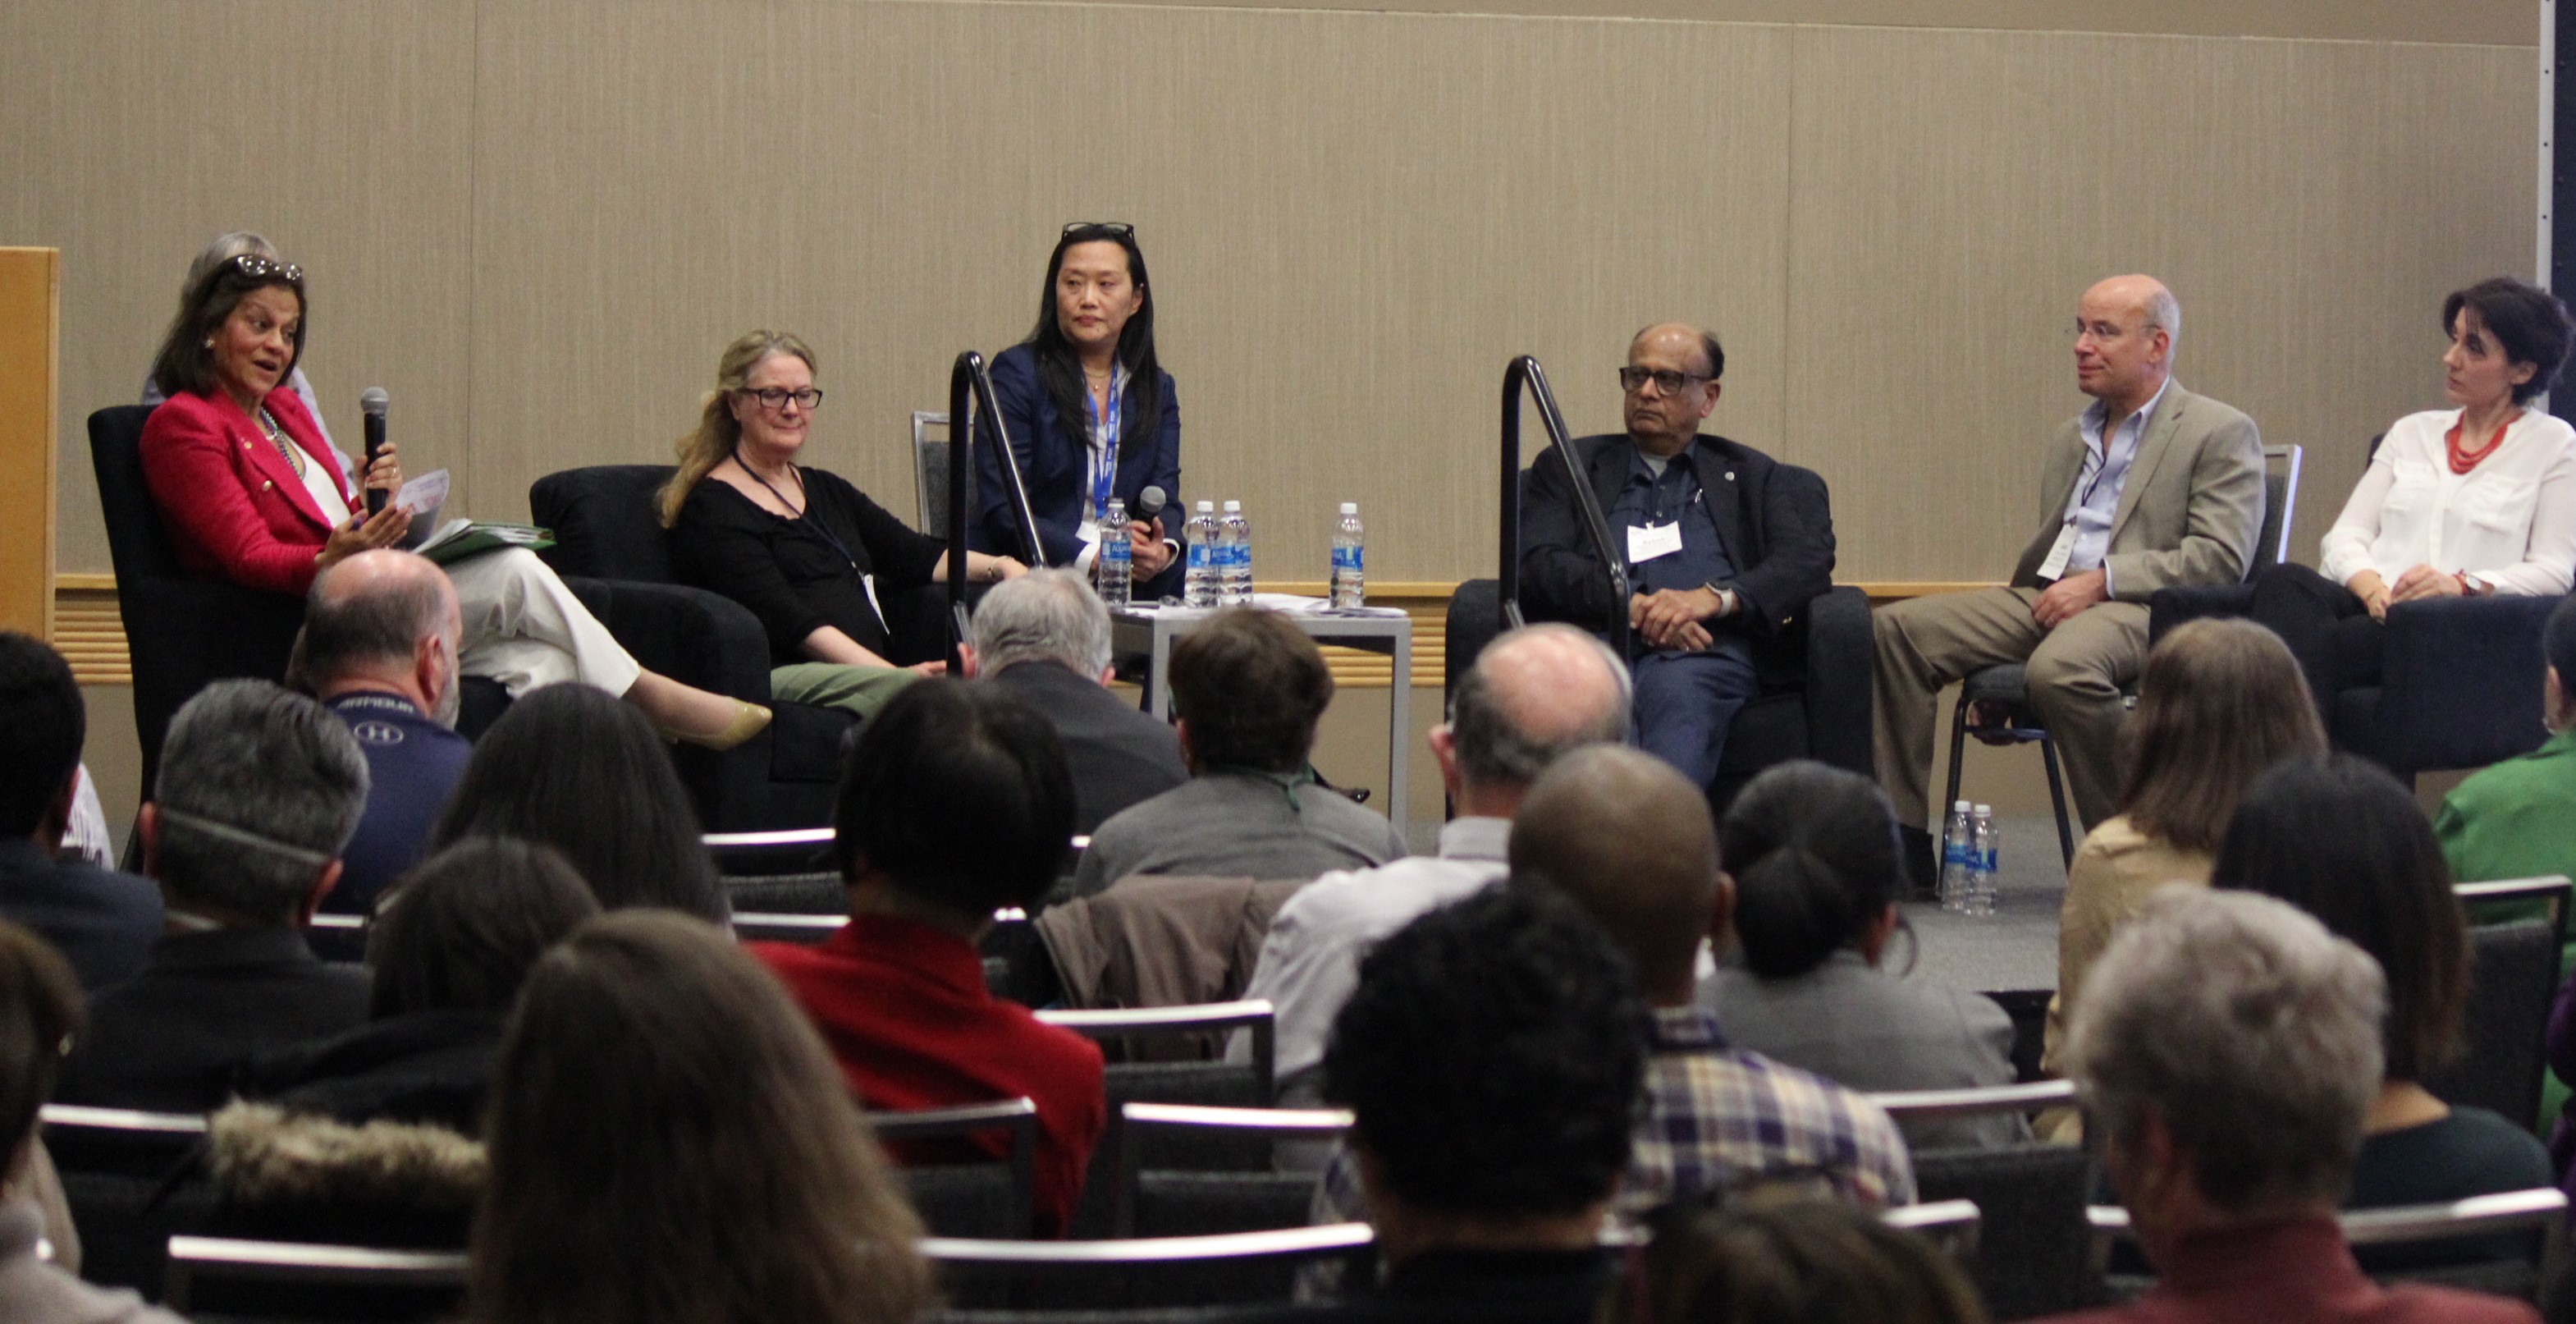 NIDCR Director Dr. D'Souza moderated a panel of intramural scientists.